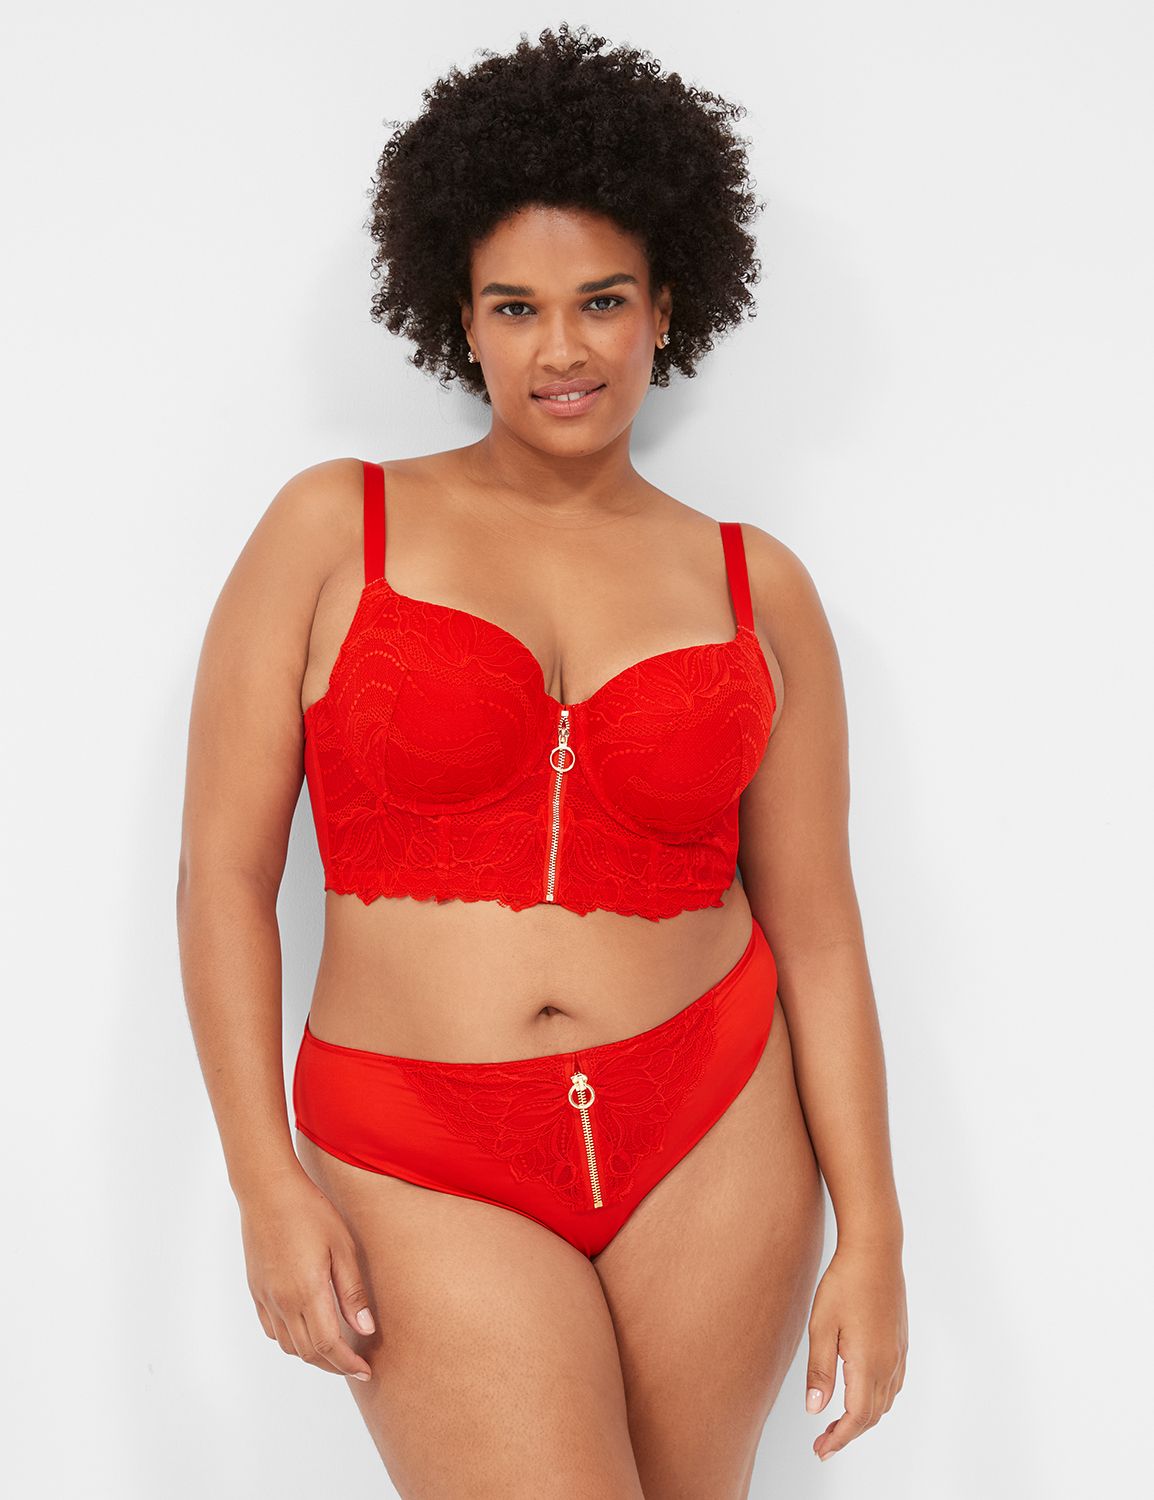 New Look longline push up lace bra in bright red